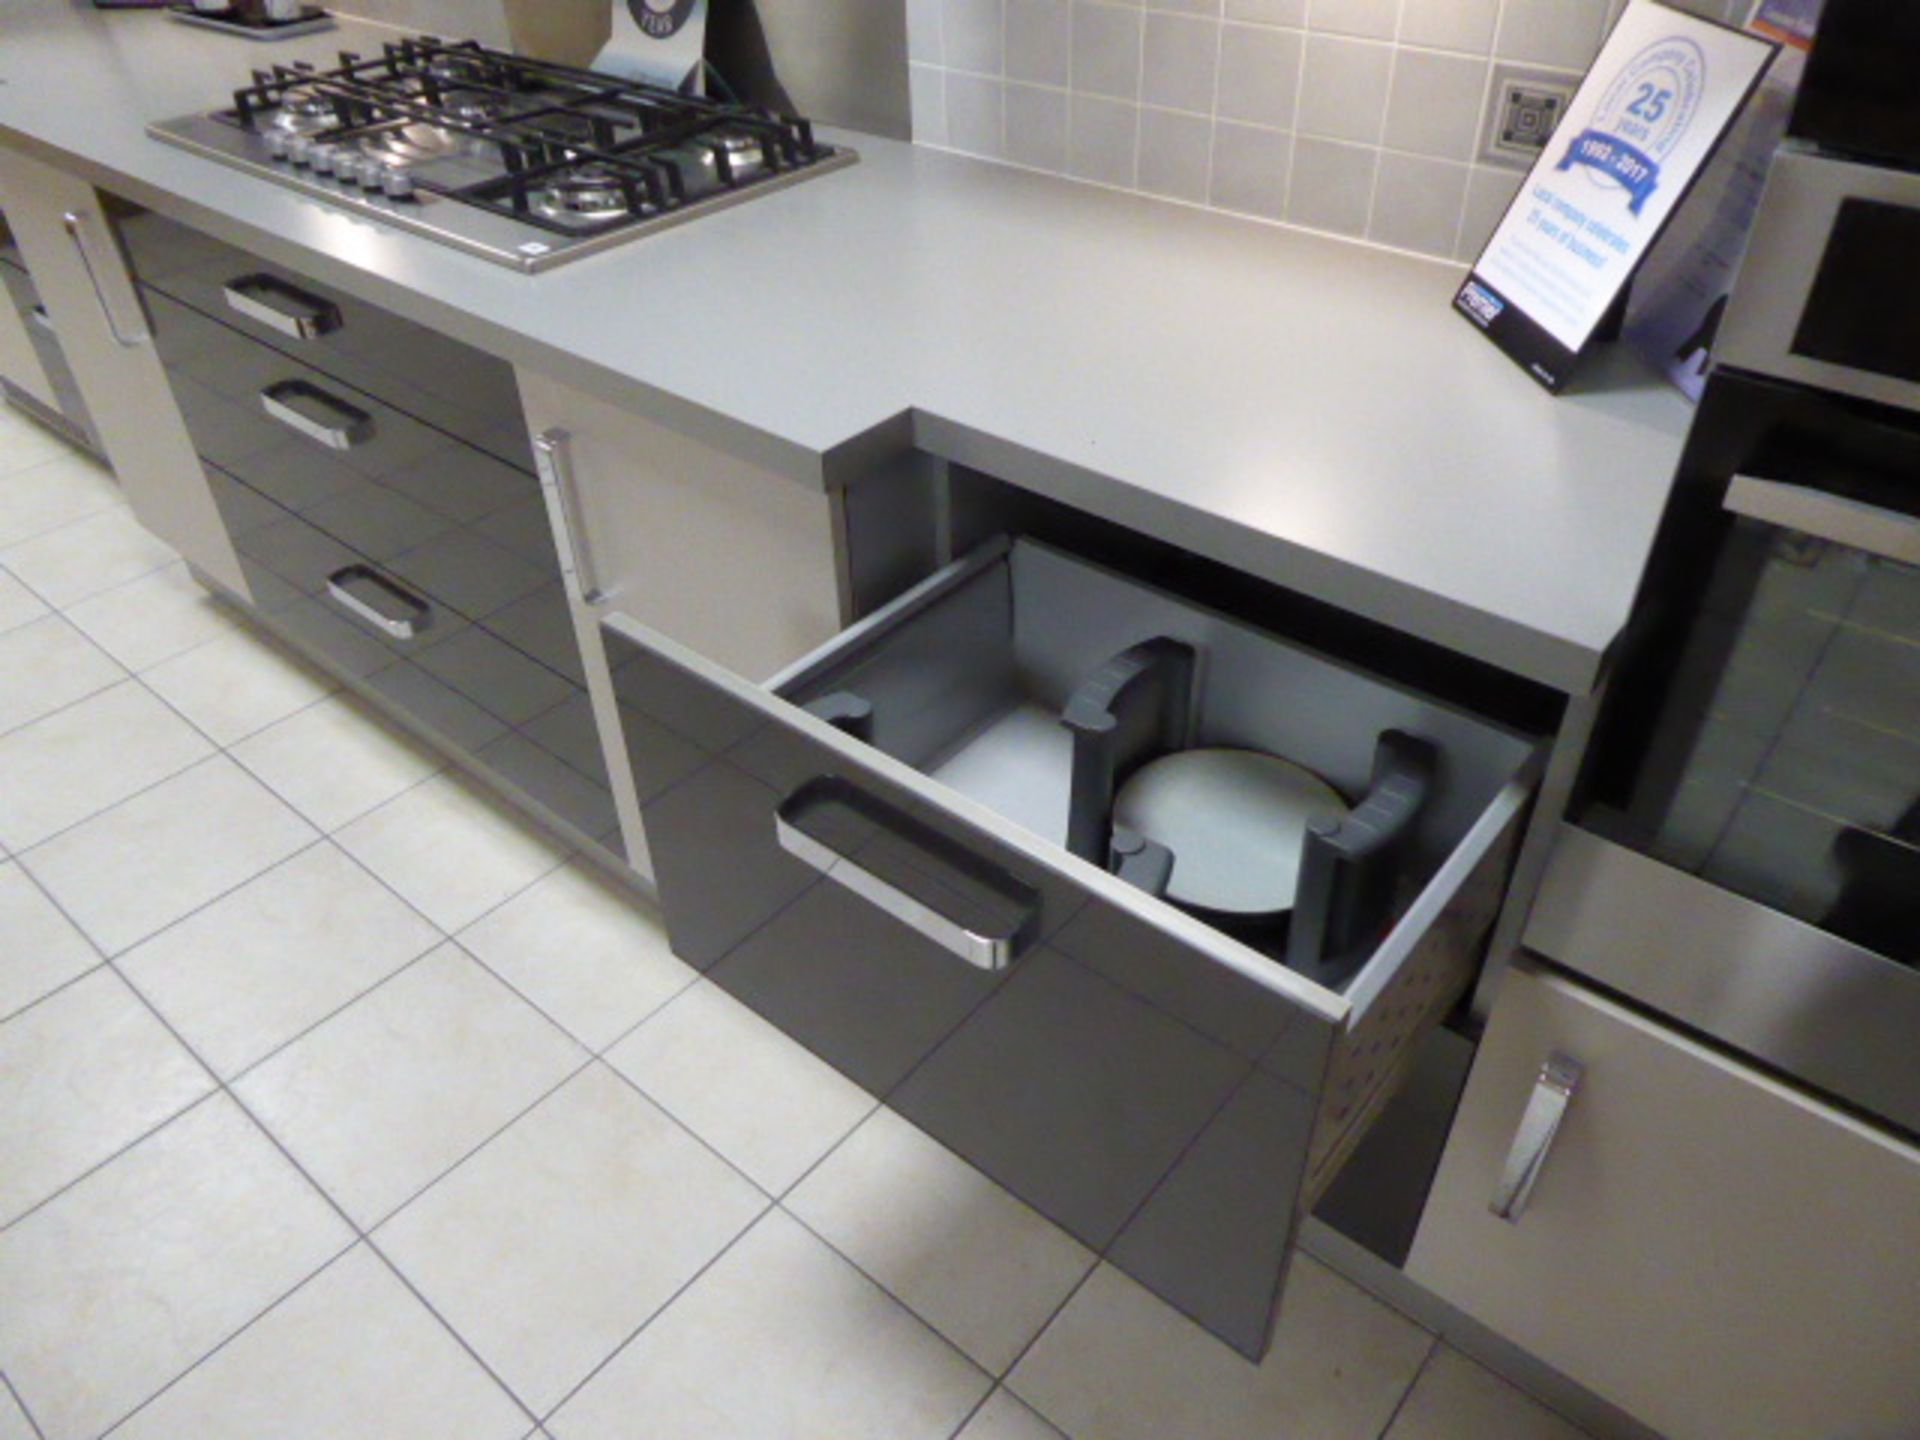 Roma Grey Metallic and Roma Grey Matte Cashmere kitchen in single galley run with a brushed - Image 10 of 14